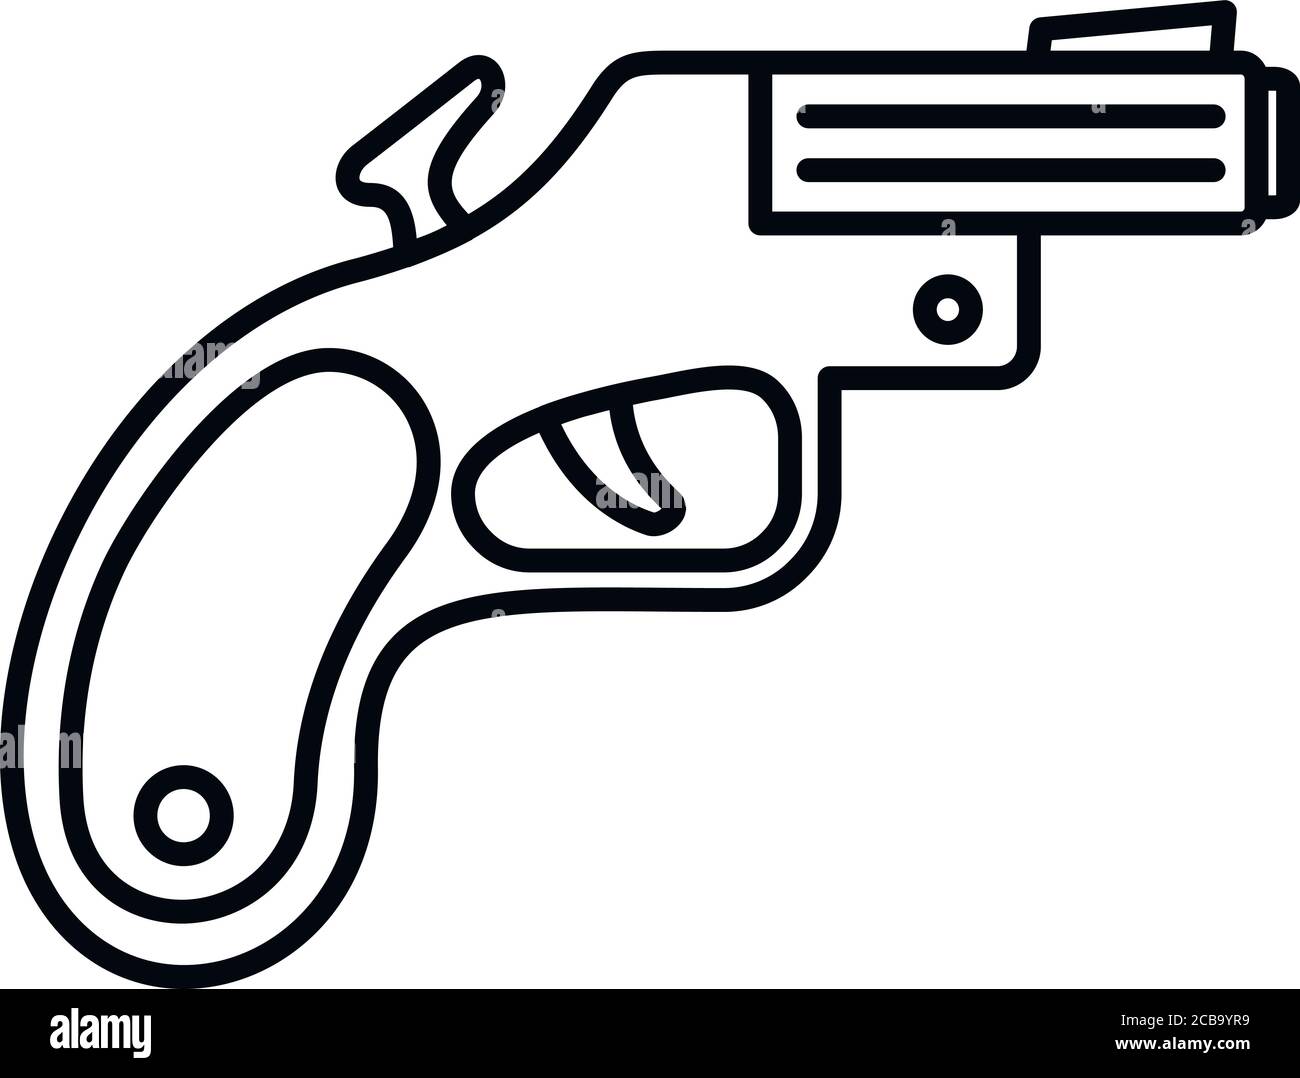 Signal flare gun Black and White Stock Photos & Images - Alamy